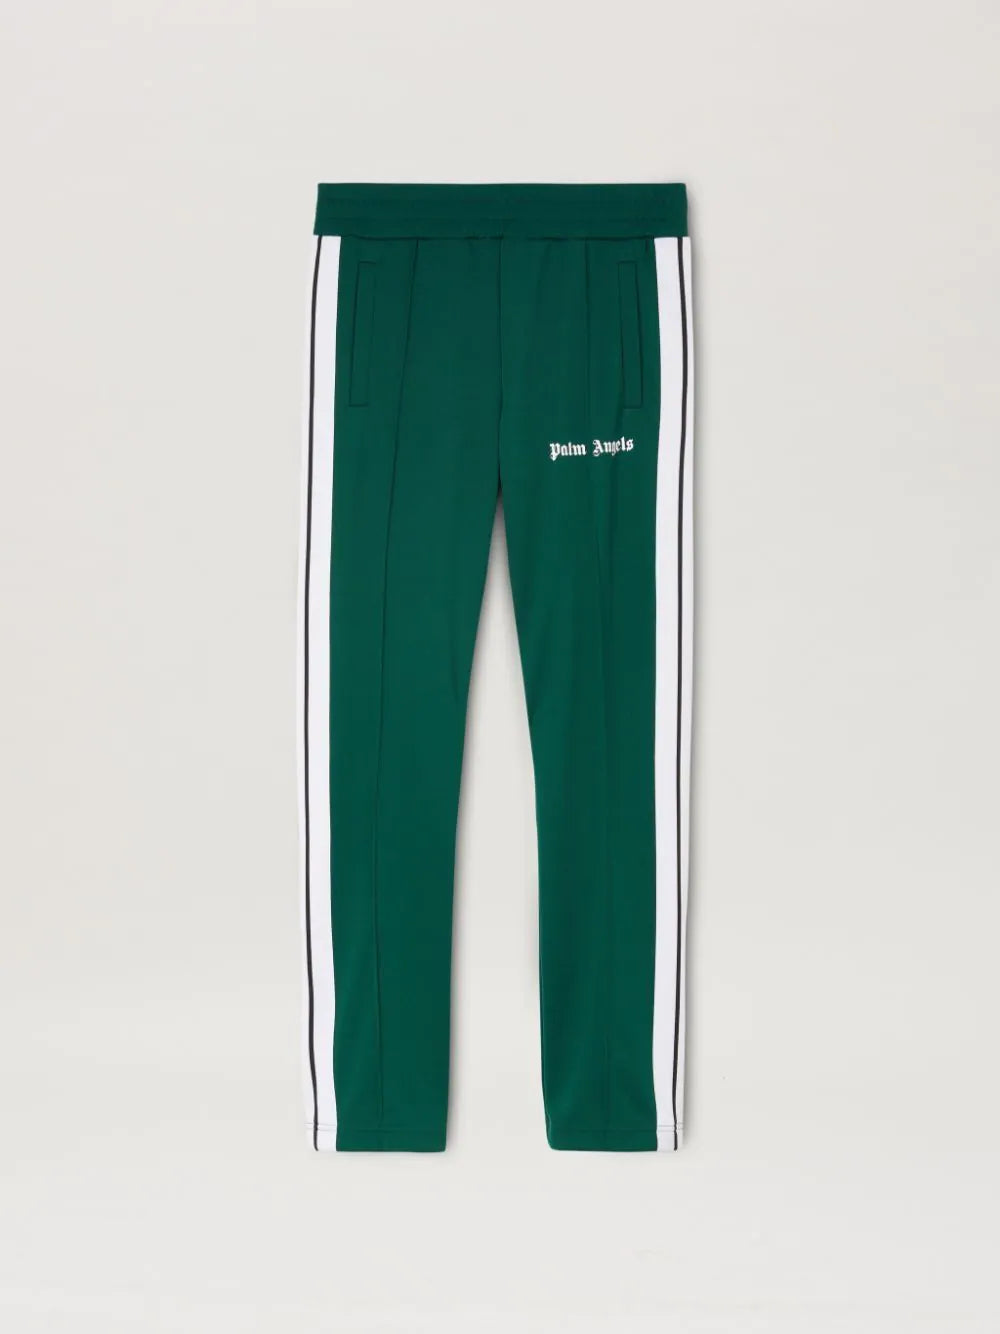 Palm Angels Track Pants Green/White